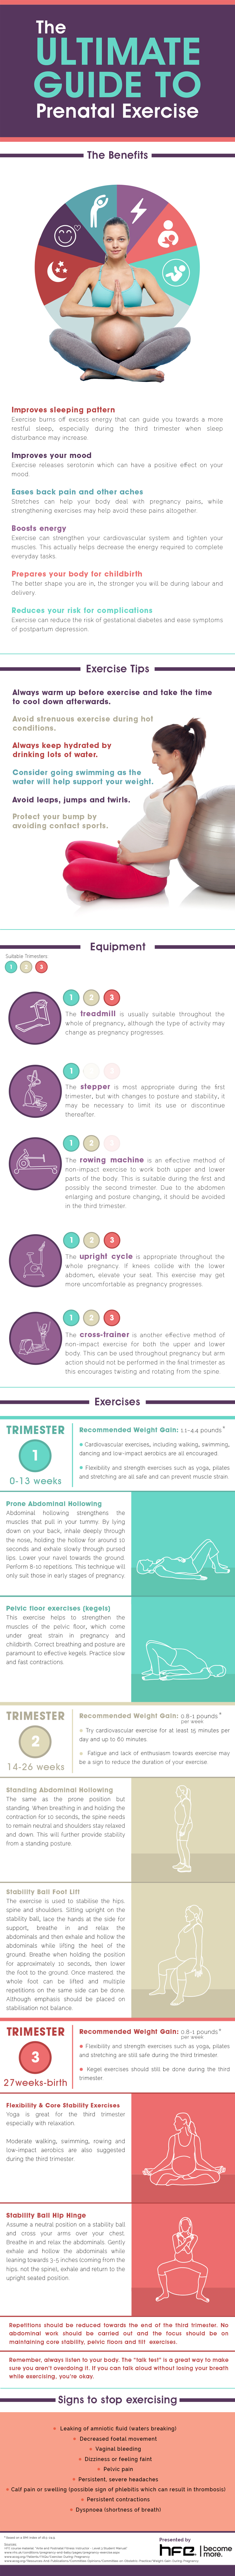 A guide to prenatal exercise for fitness professionals